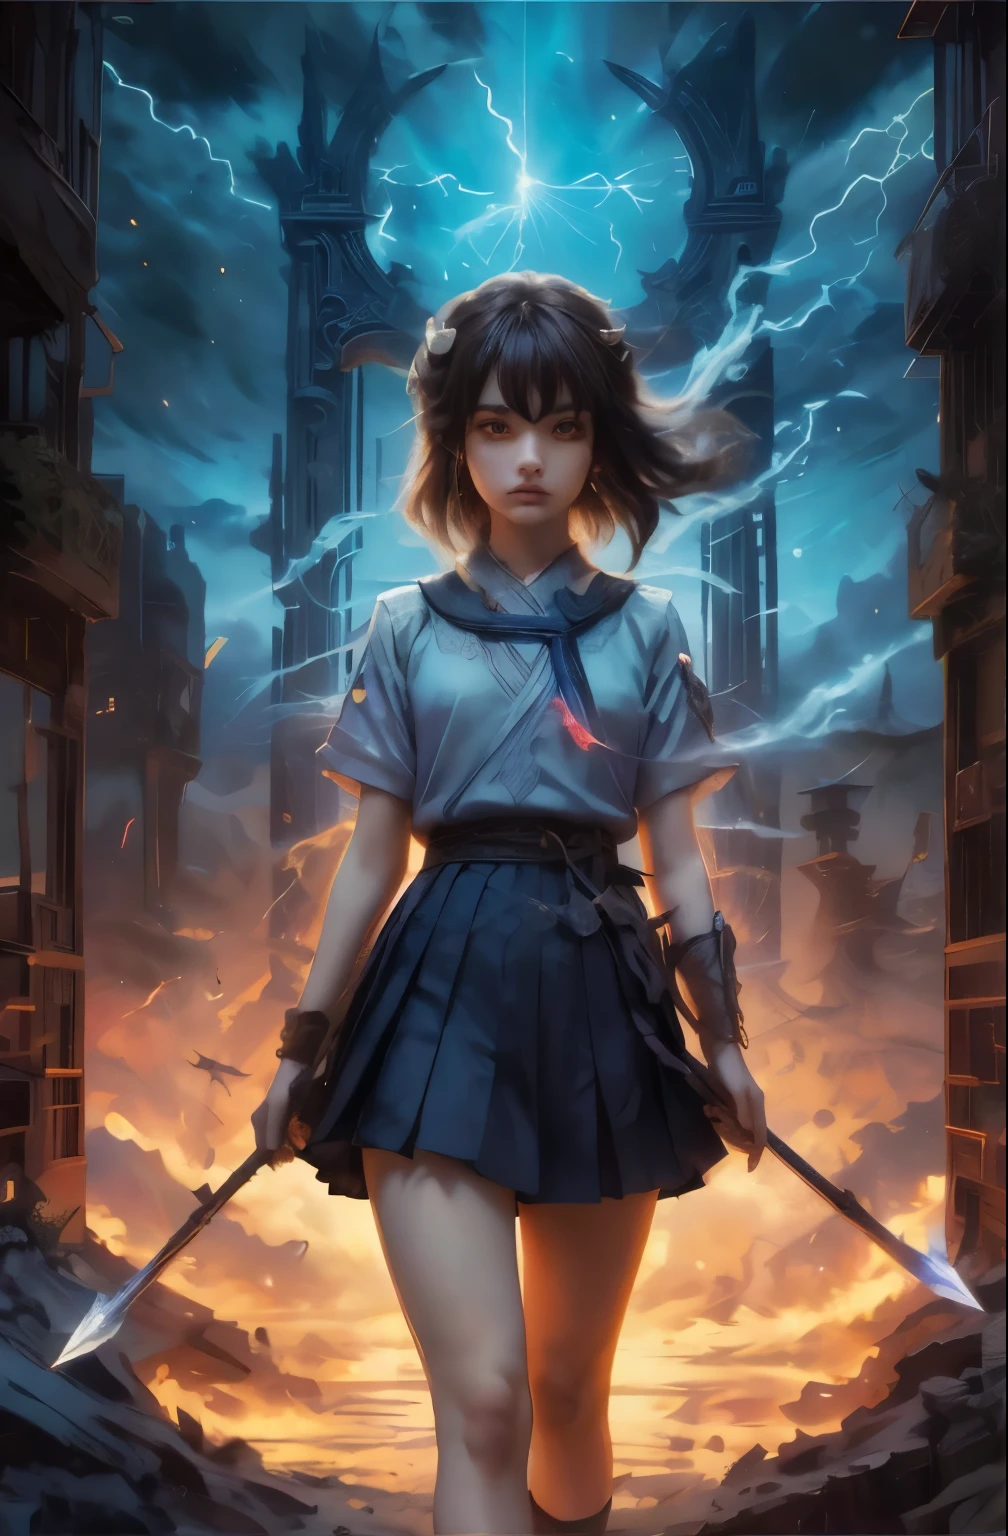 A small cute but frail girl holding a small hunting bow, quiver with arrows on her back, wearing a Japanese school girl uniform, white blouse short blue skirt blue sweater vest, and school insignia, short dark hair, big round brown eyes, standing at the gates of forever, bow and arrows, girlwind chimes, tones of wind, chimes ringing in eternity, dark foreboding planet of sand and ash, hums and chimes with long lost civilizations ghosts, hollows wind, hollow, hallowed, strike the bell, peal the rhyme let lose the thunder on high, crack lightnings whip,digital artwork by Beksinski, traveler through refined beauty and color variation, a peek into the eternal,  temple, (torii:1.2), evening, neon lights, futuristic, elegant, glowing, mysterious, meditation, chaos, destruction, storm, scenic, iconic, midjourney, cyberpunk, neo-tokyo, scifi, looking at viewer, light and dark, life and death, 2-tone body, holding large sword, nodf_lora, surrounded by multiple swords stabbed into the ground,klee (genshin impact)